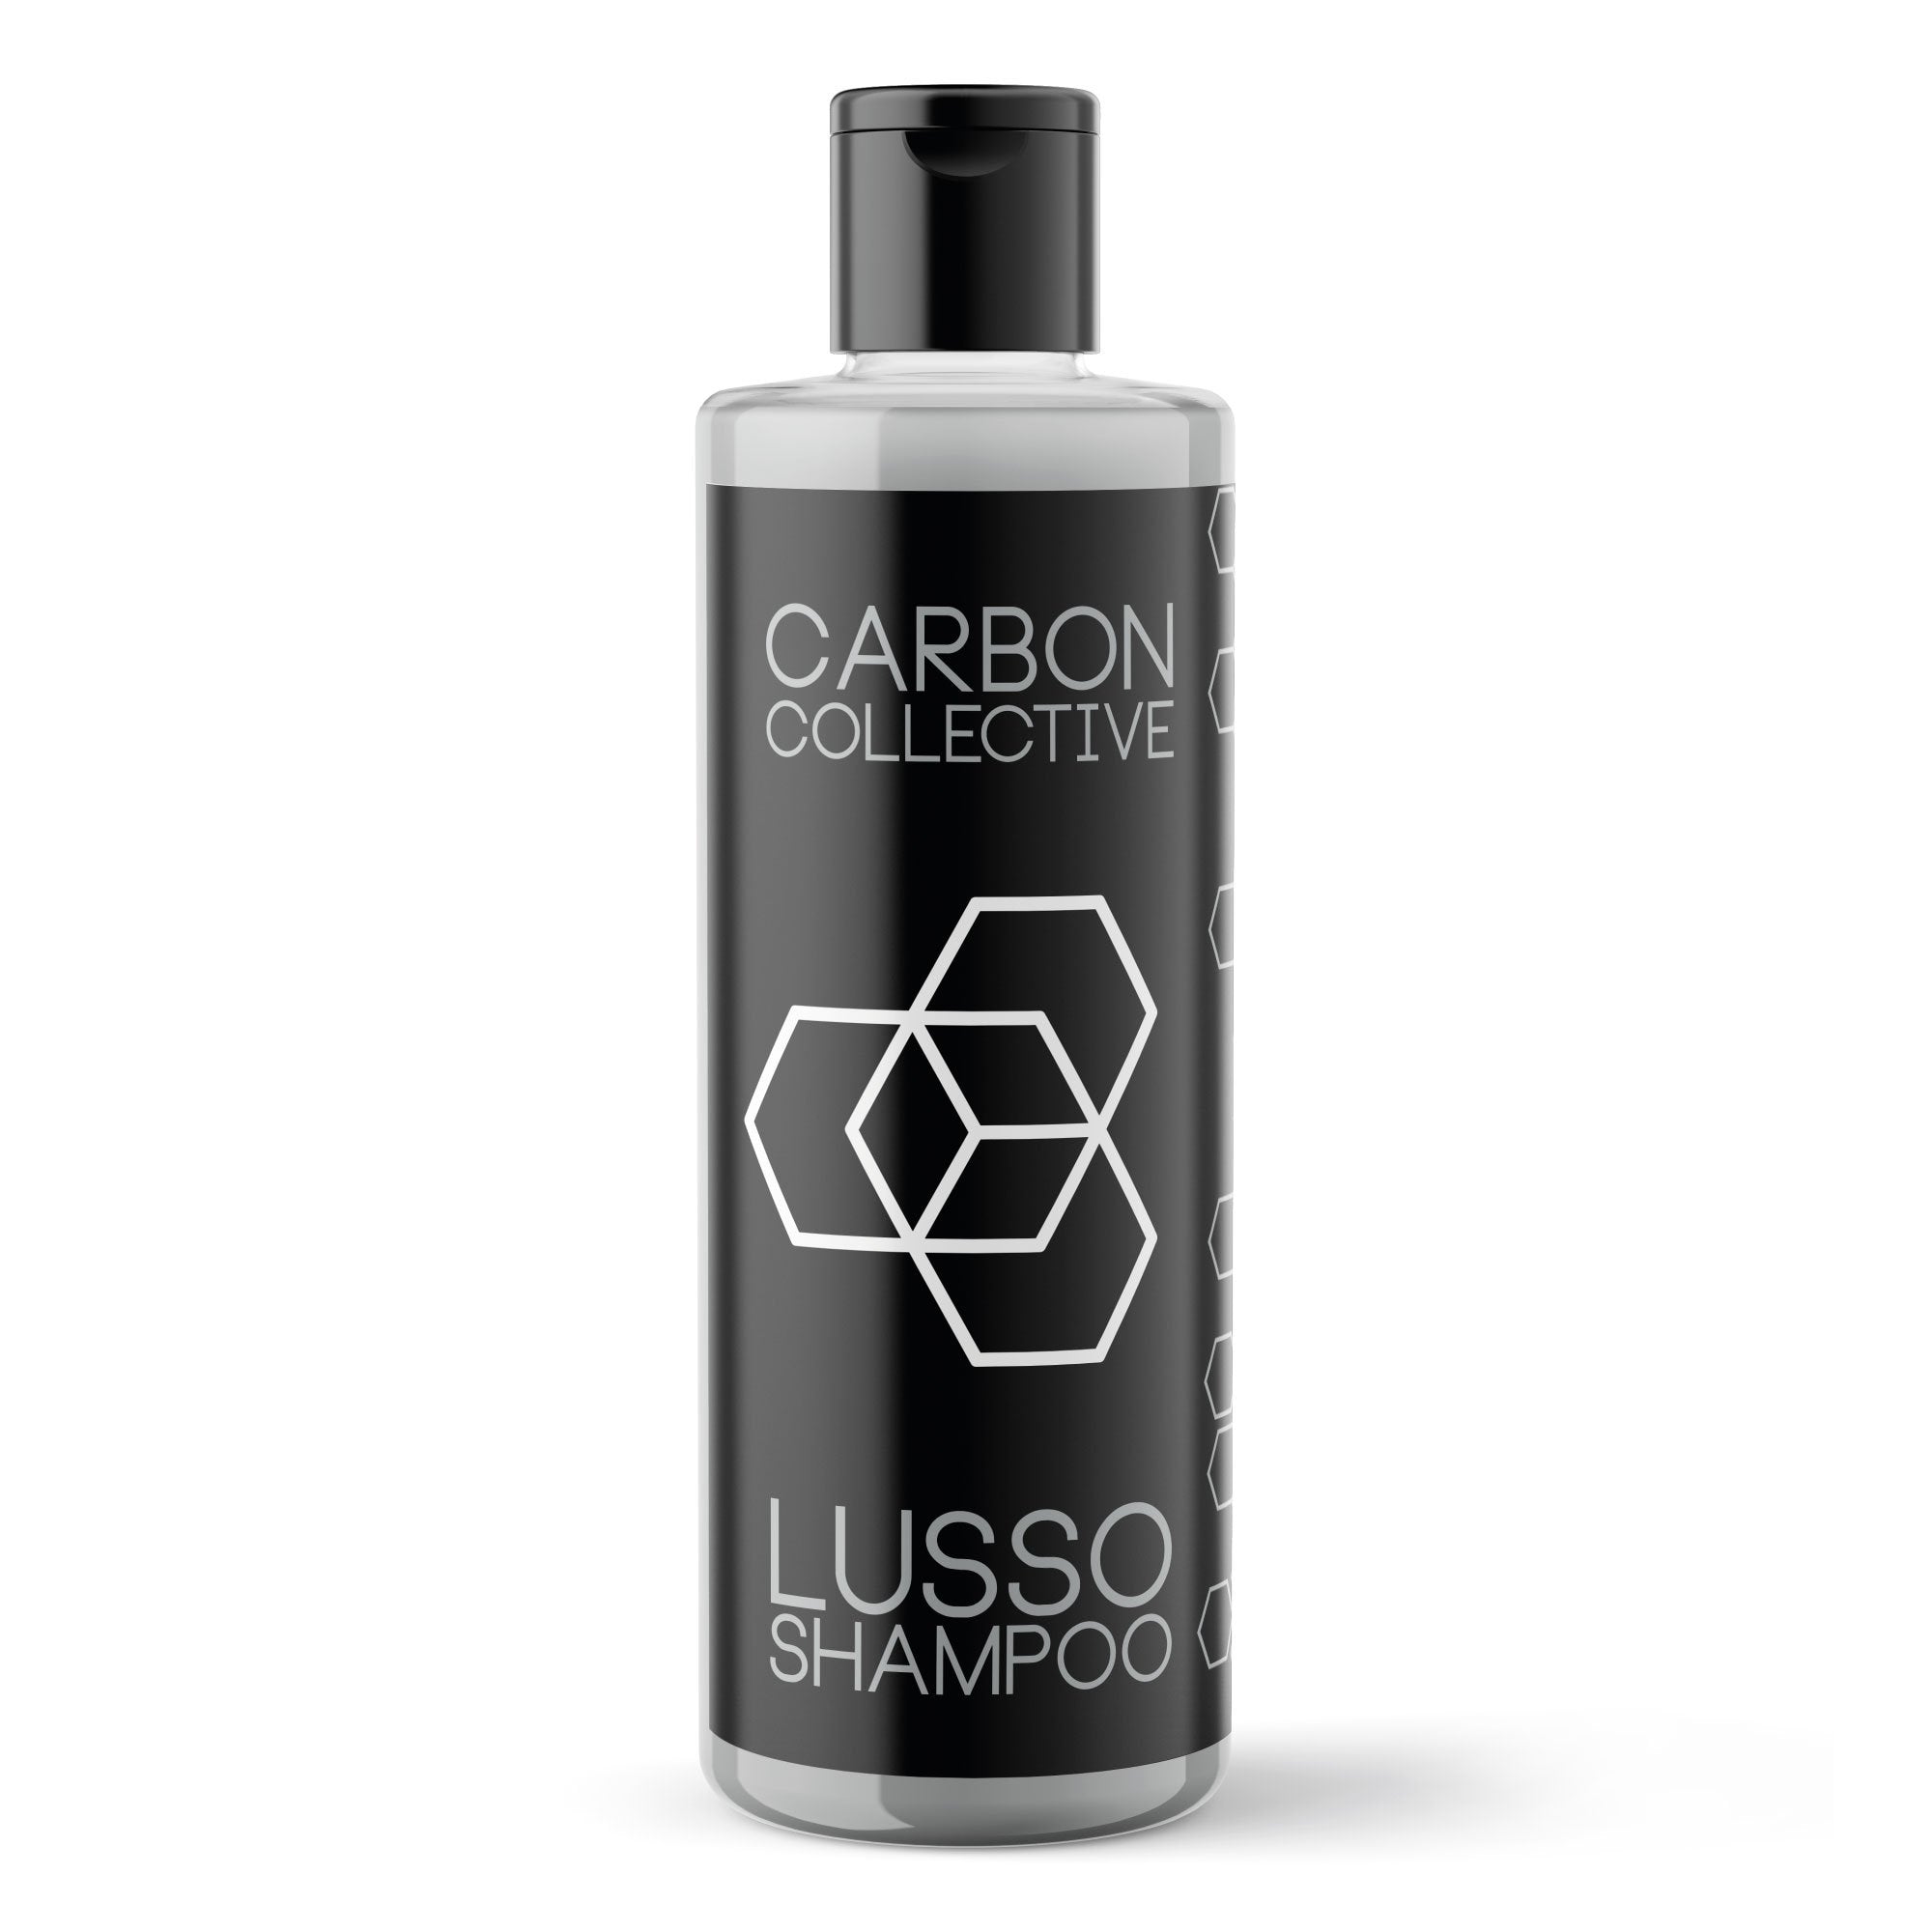 Carbon Collective Lusso Shampoo 2.0